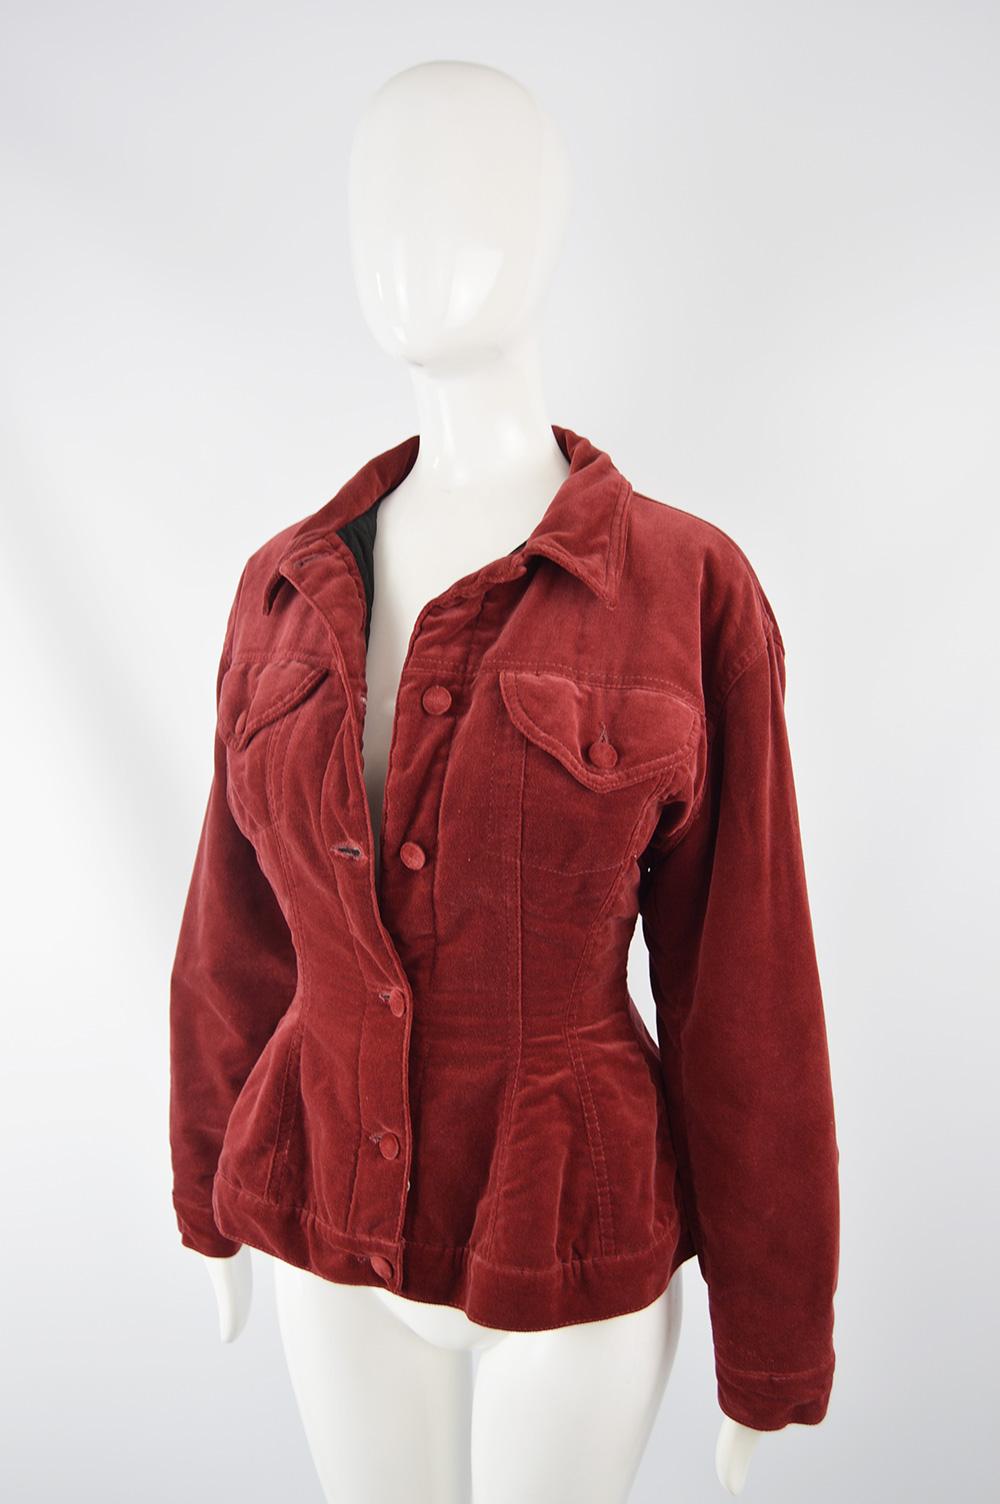 Jean Paul Gaultier Vintage Red Velvet Nipped Waist Jacket, 1980s In Good Condition For Sale In Doncaster, South Yorkshire